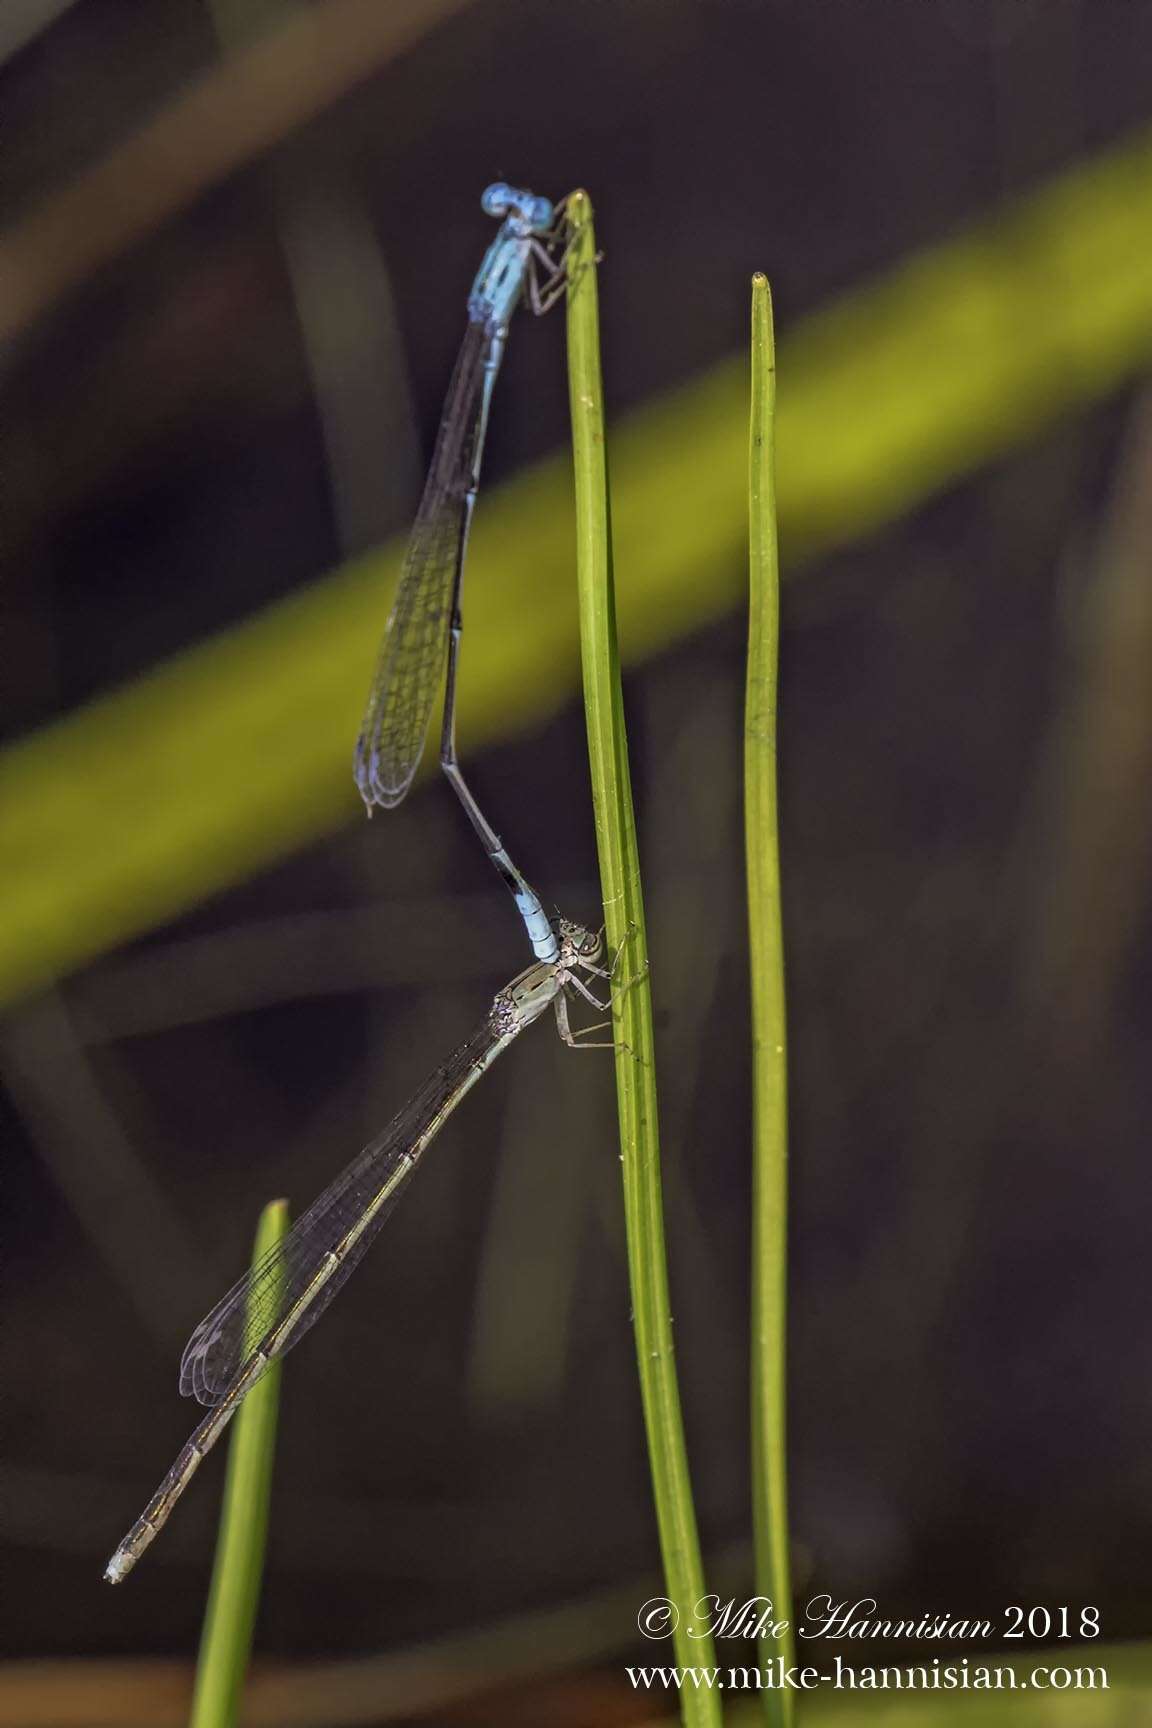 Image of Attentuated Bluet